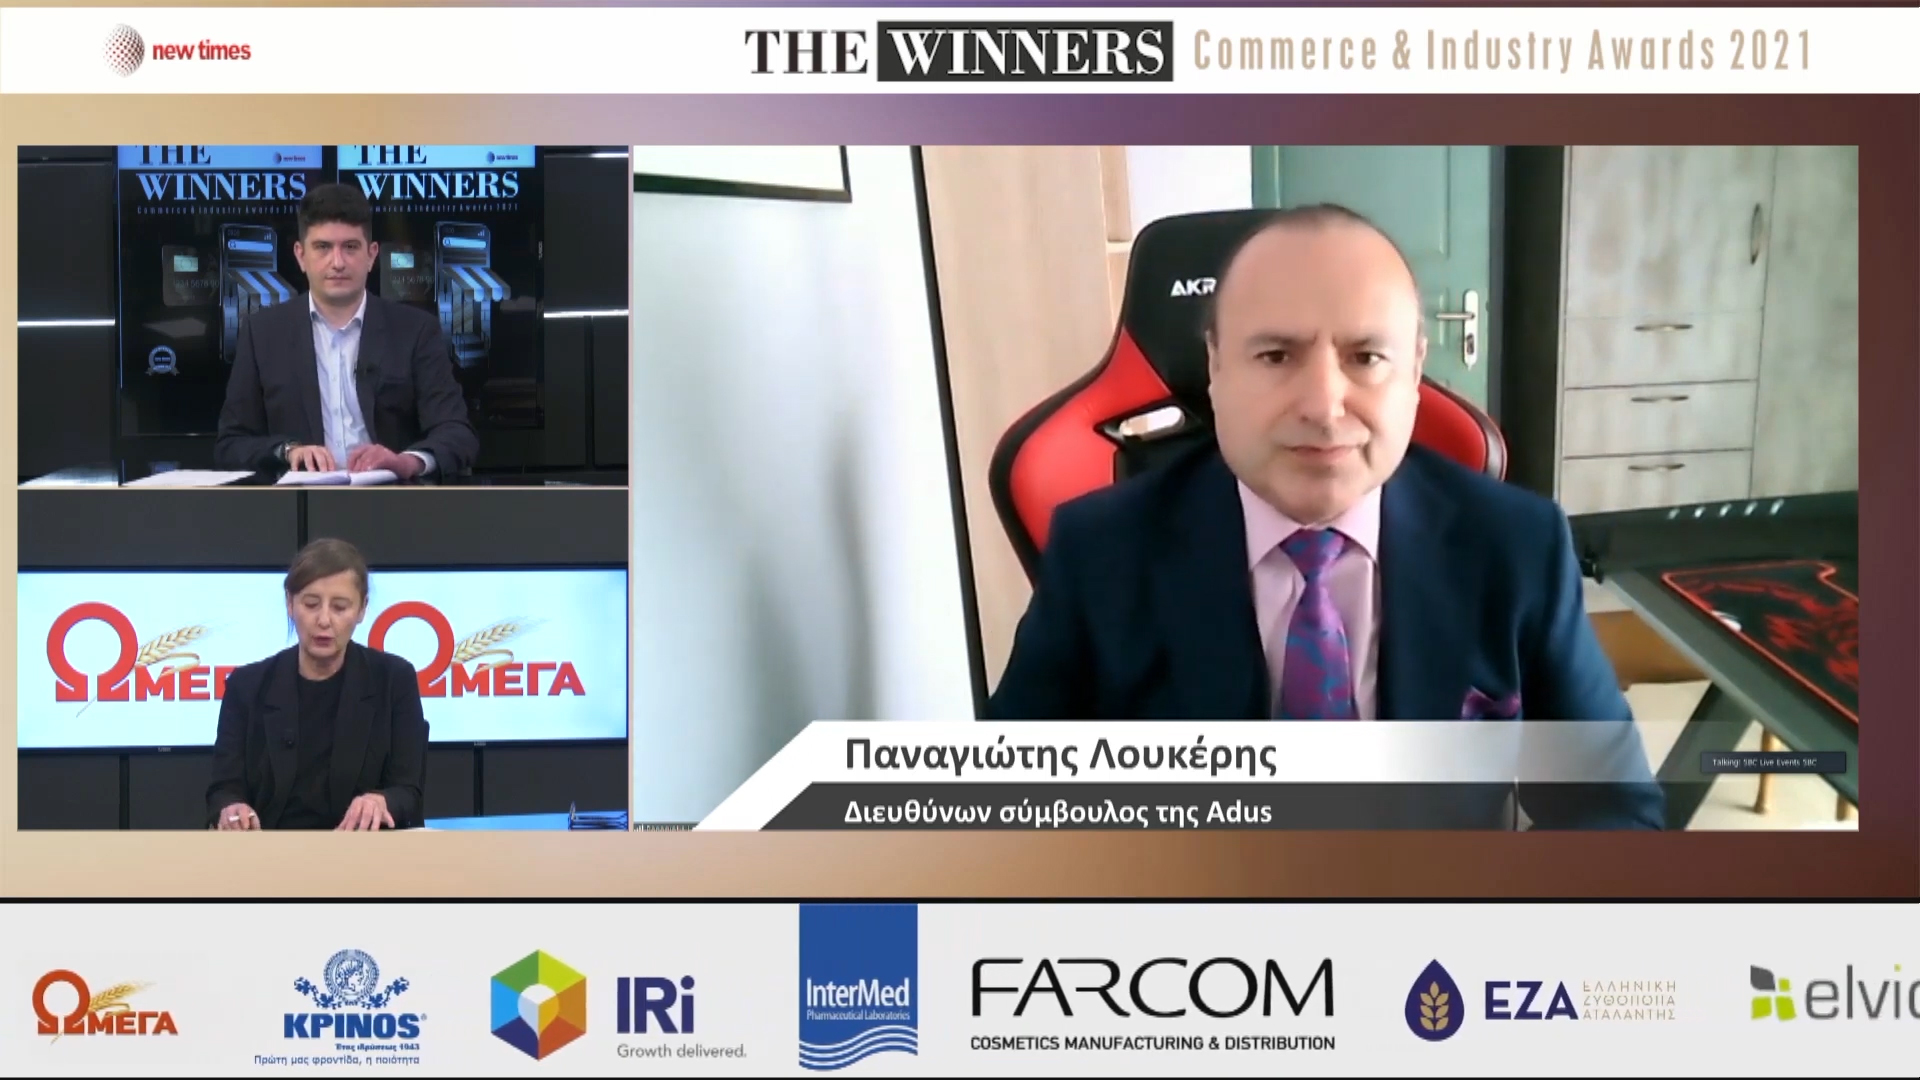 ADUS at the digital forum “The Winners - Commerce & Industry Forum 2021”